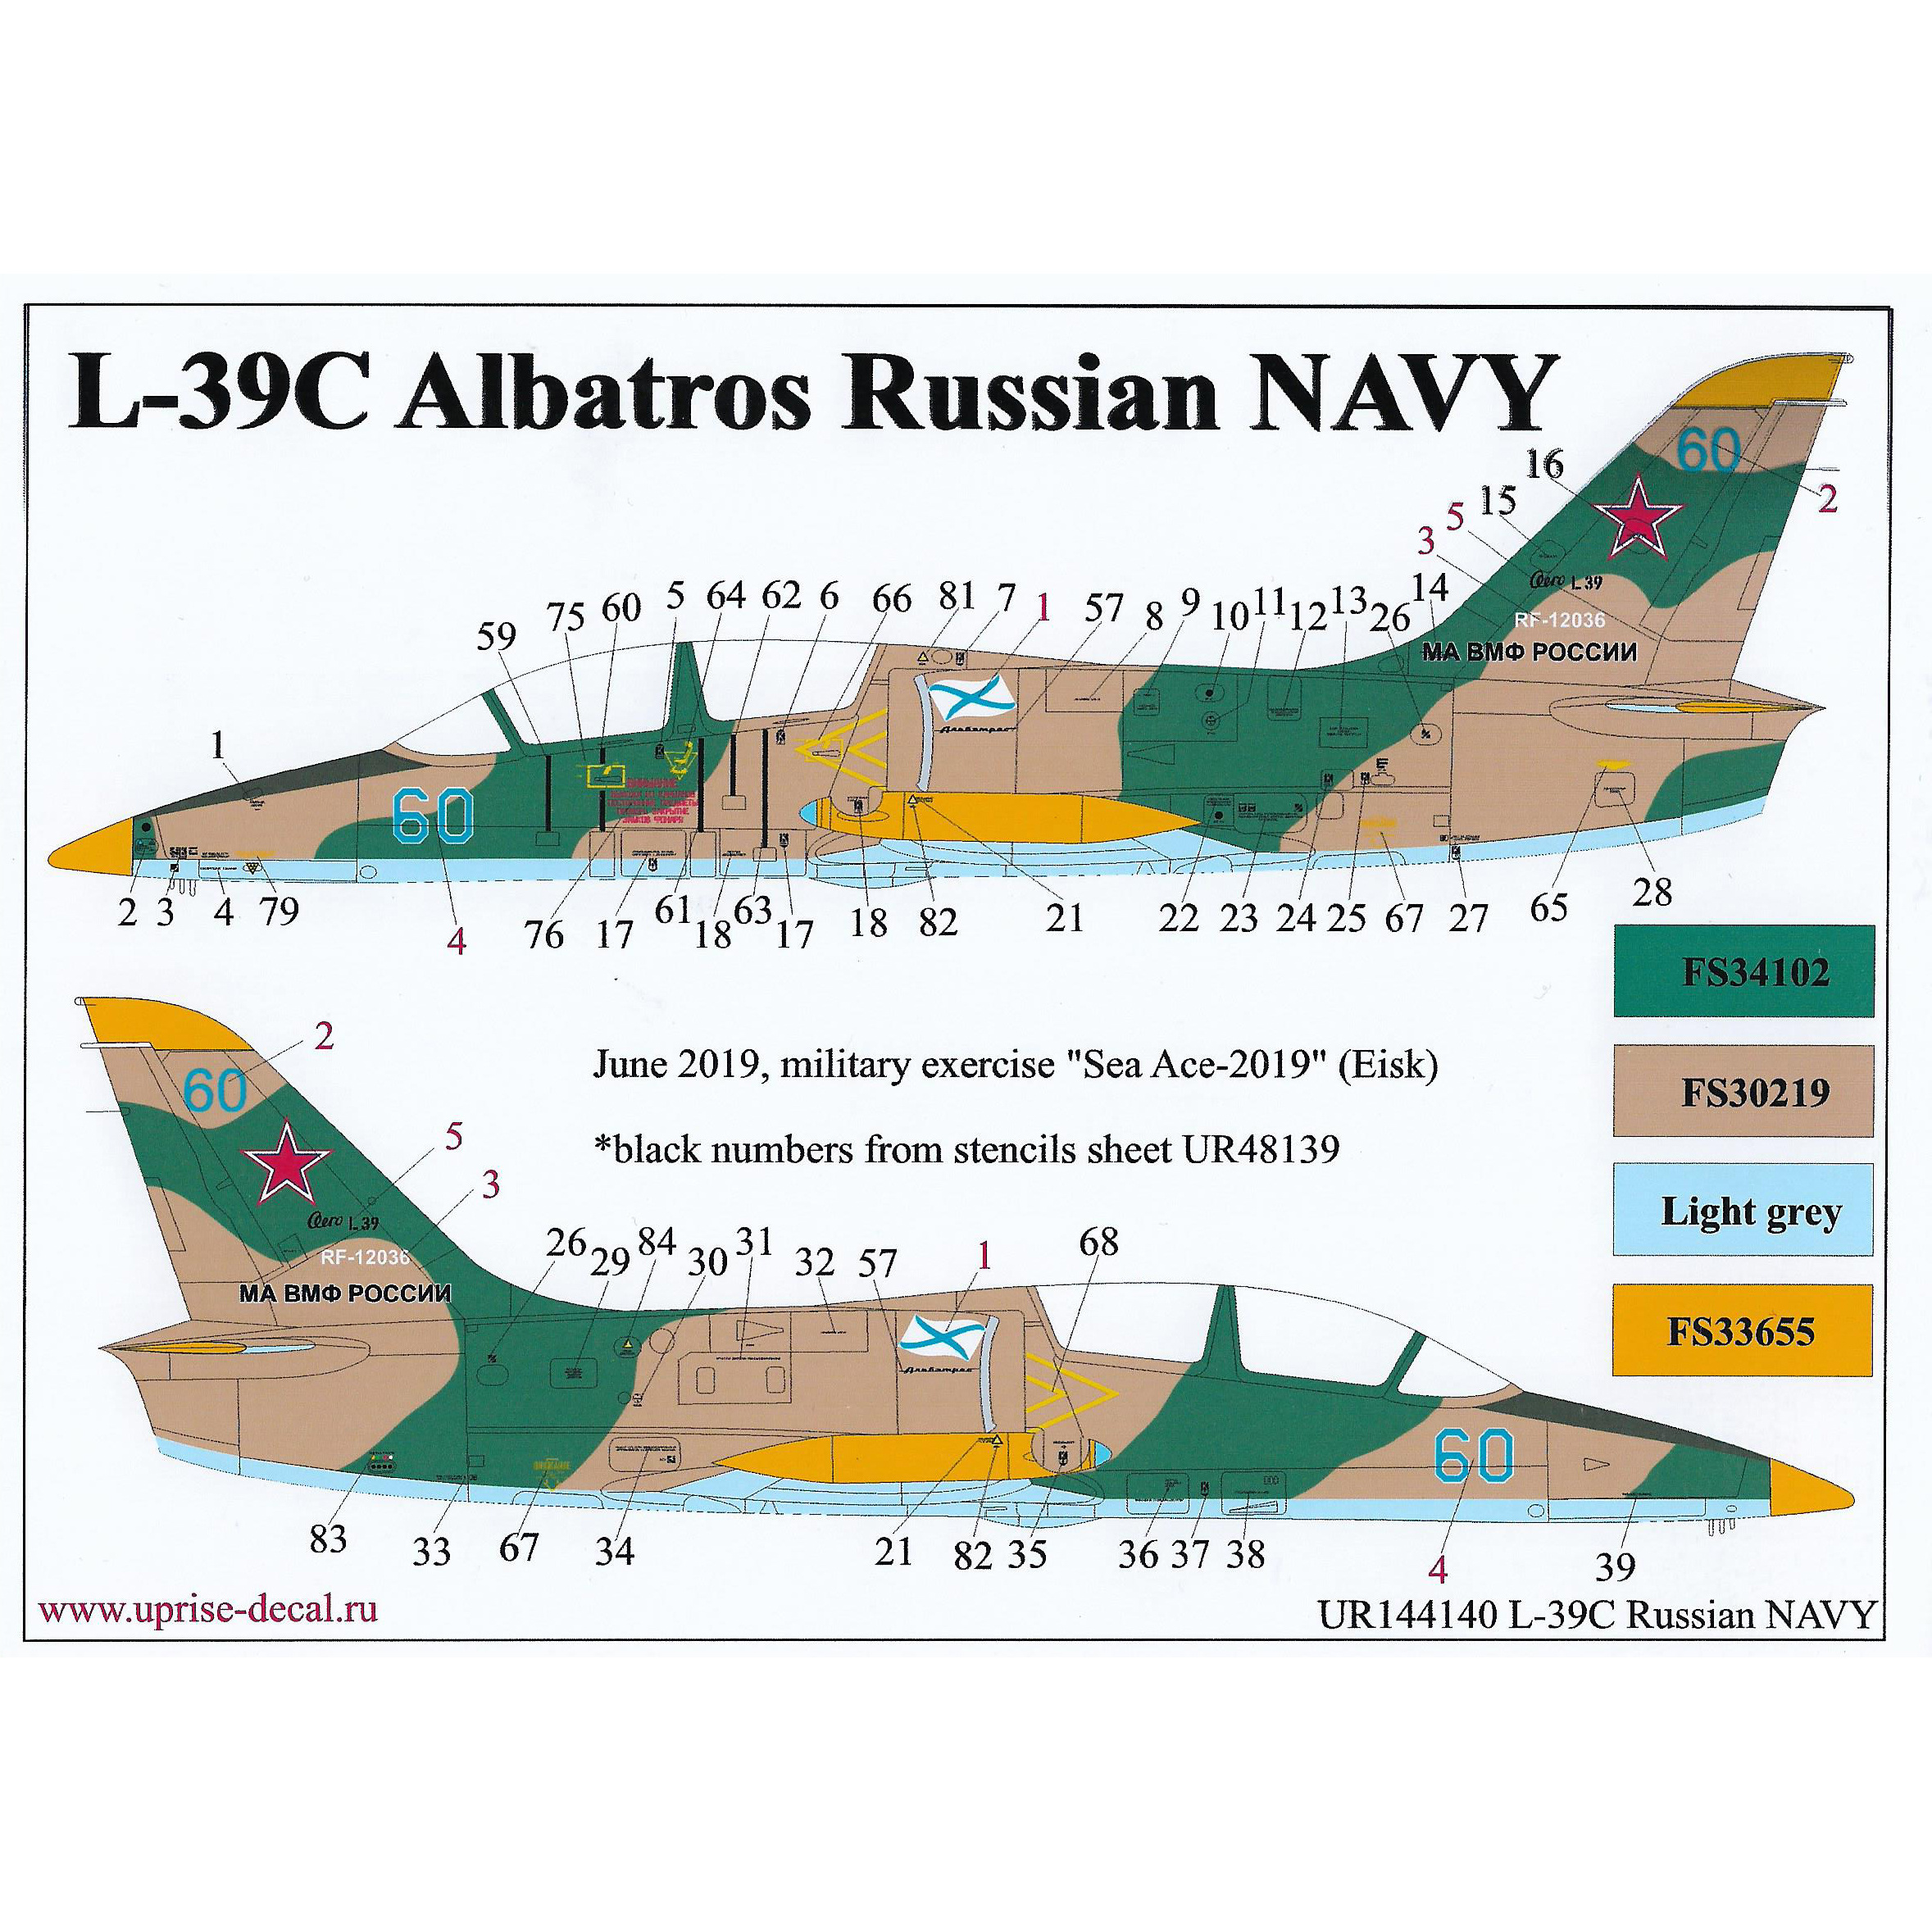 UR144140 Sunrise 1/144 Decals for L-39C Albatros of the Russian Navy since then. inscriptions